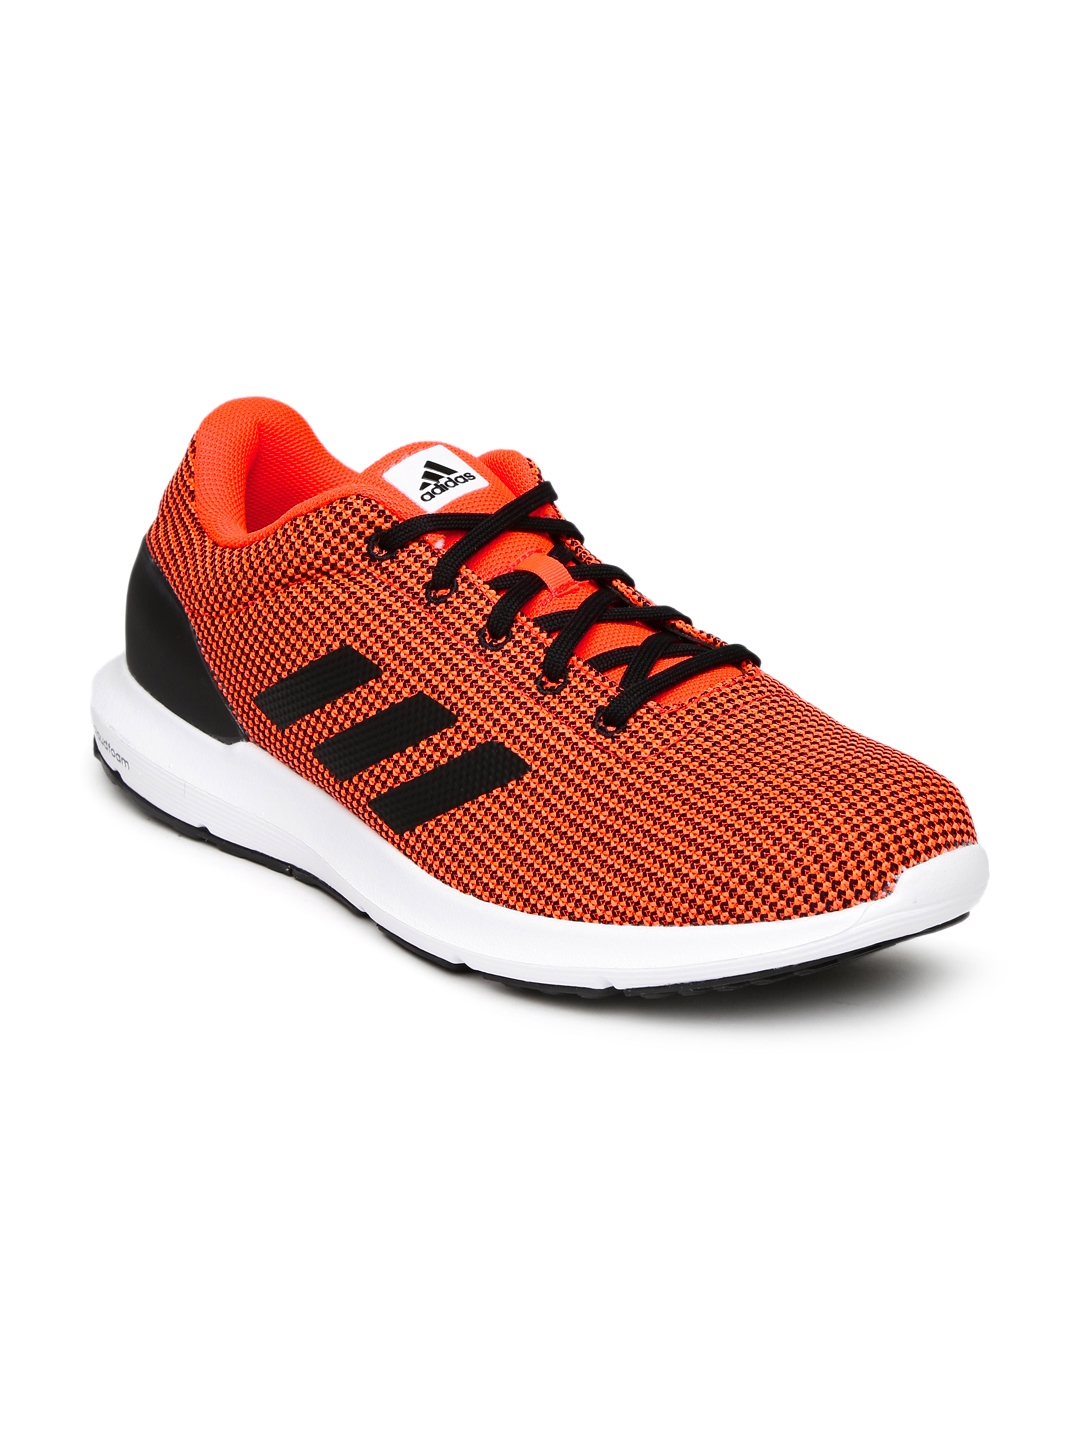 Buy ADIDAS Men Orange Patterned Cosmic Running Shoes - Sports Shoes for ...